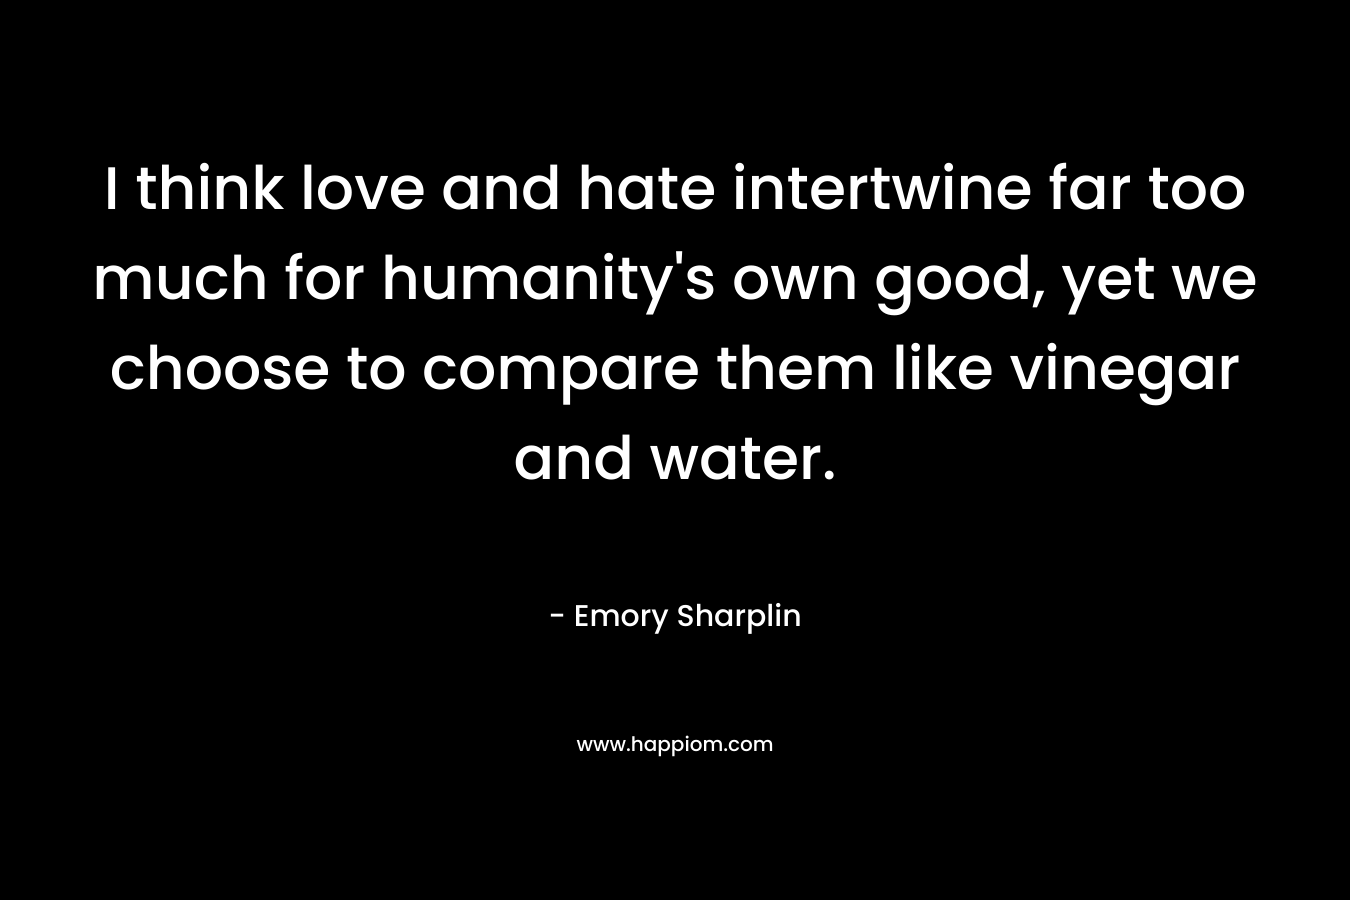 I think love and hate intertwine far too much for humanity’s own good, yet we choose to compare them like vinegar and water. – Emory Sharplin